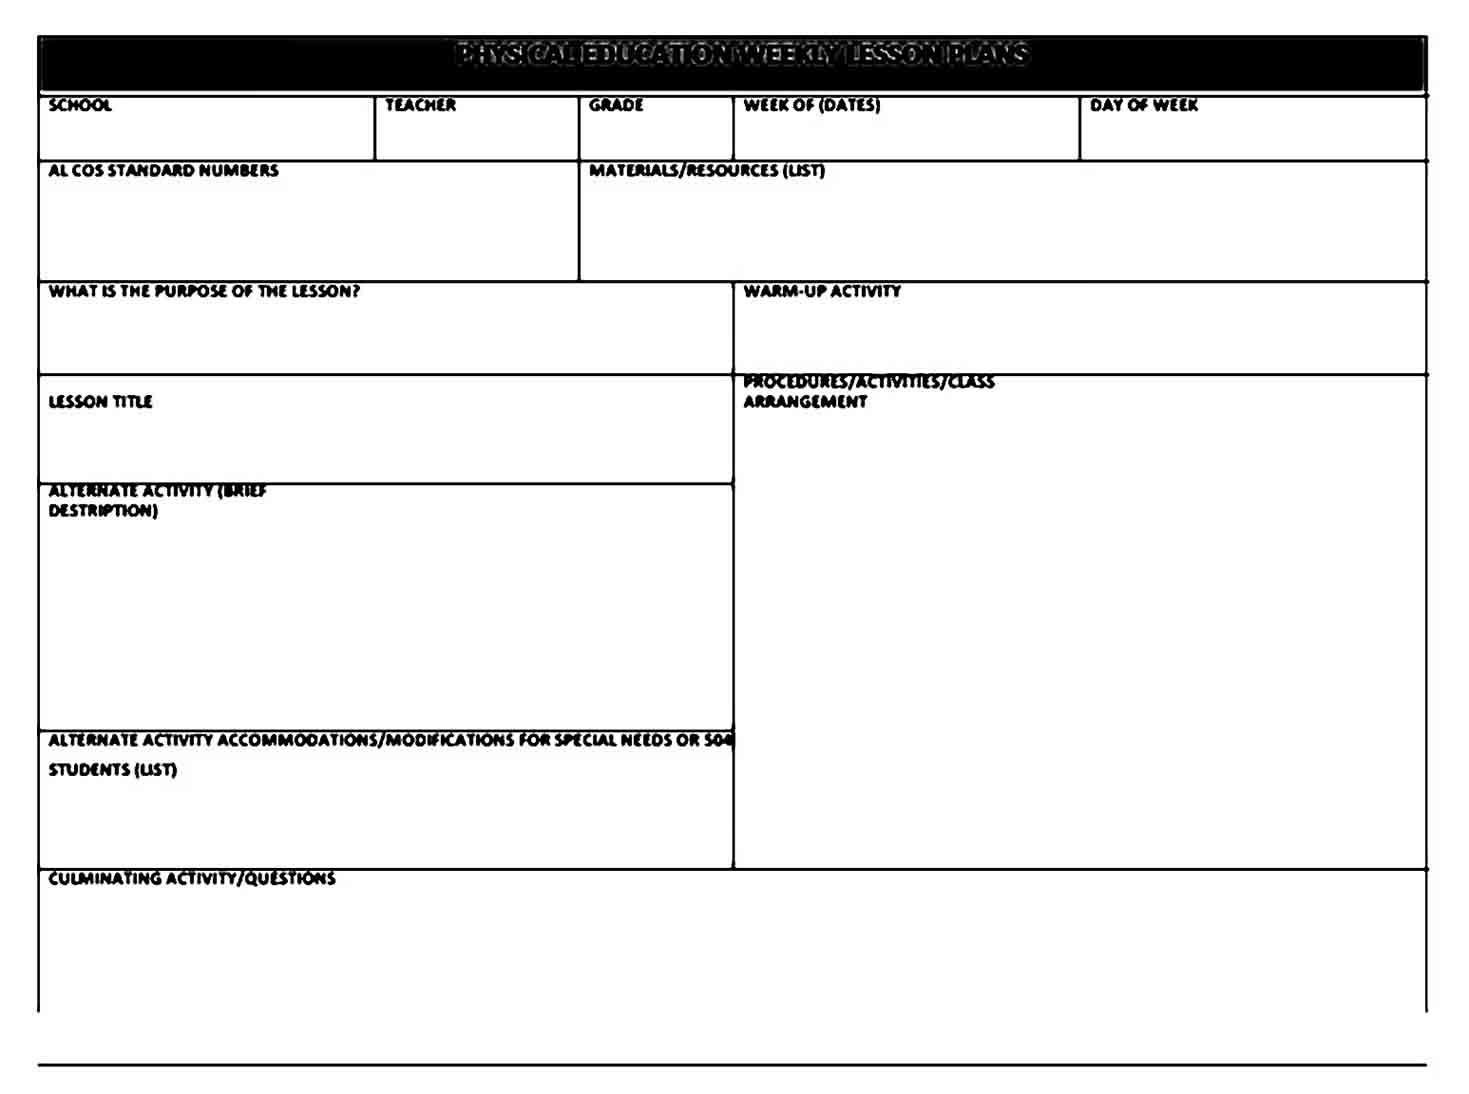 Example of Physical Education Lesson Plan templates